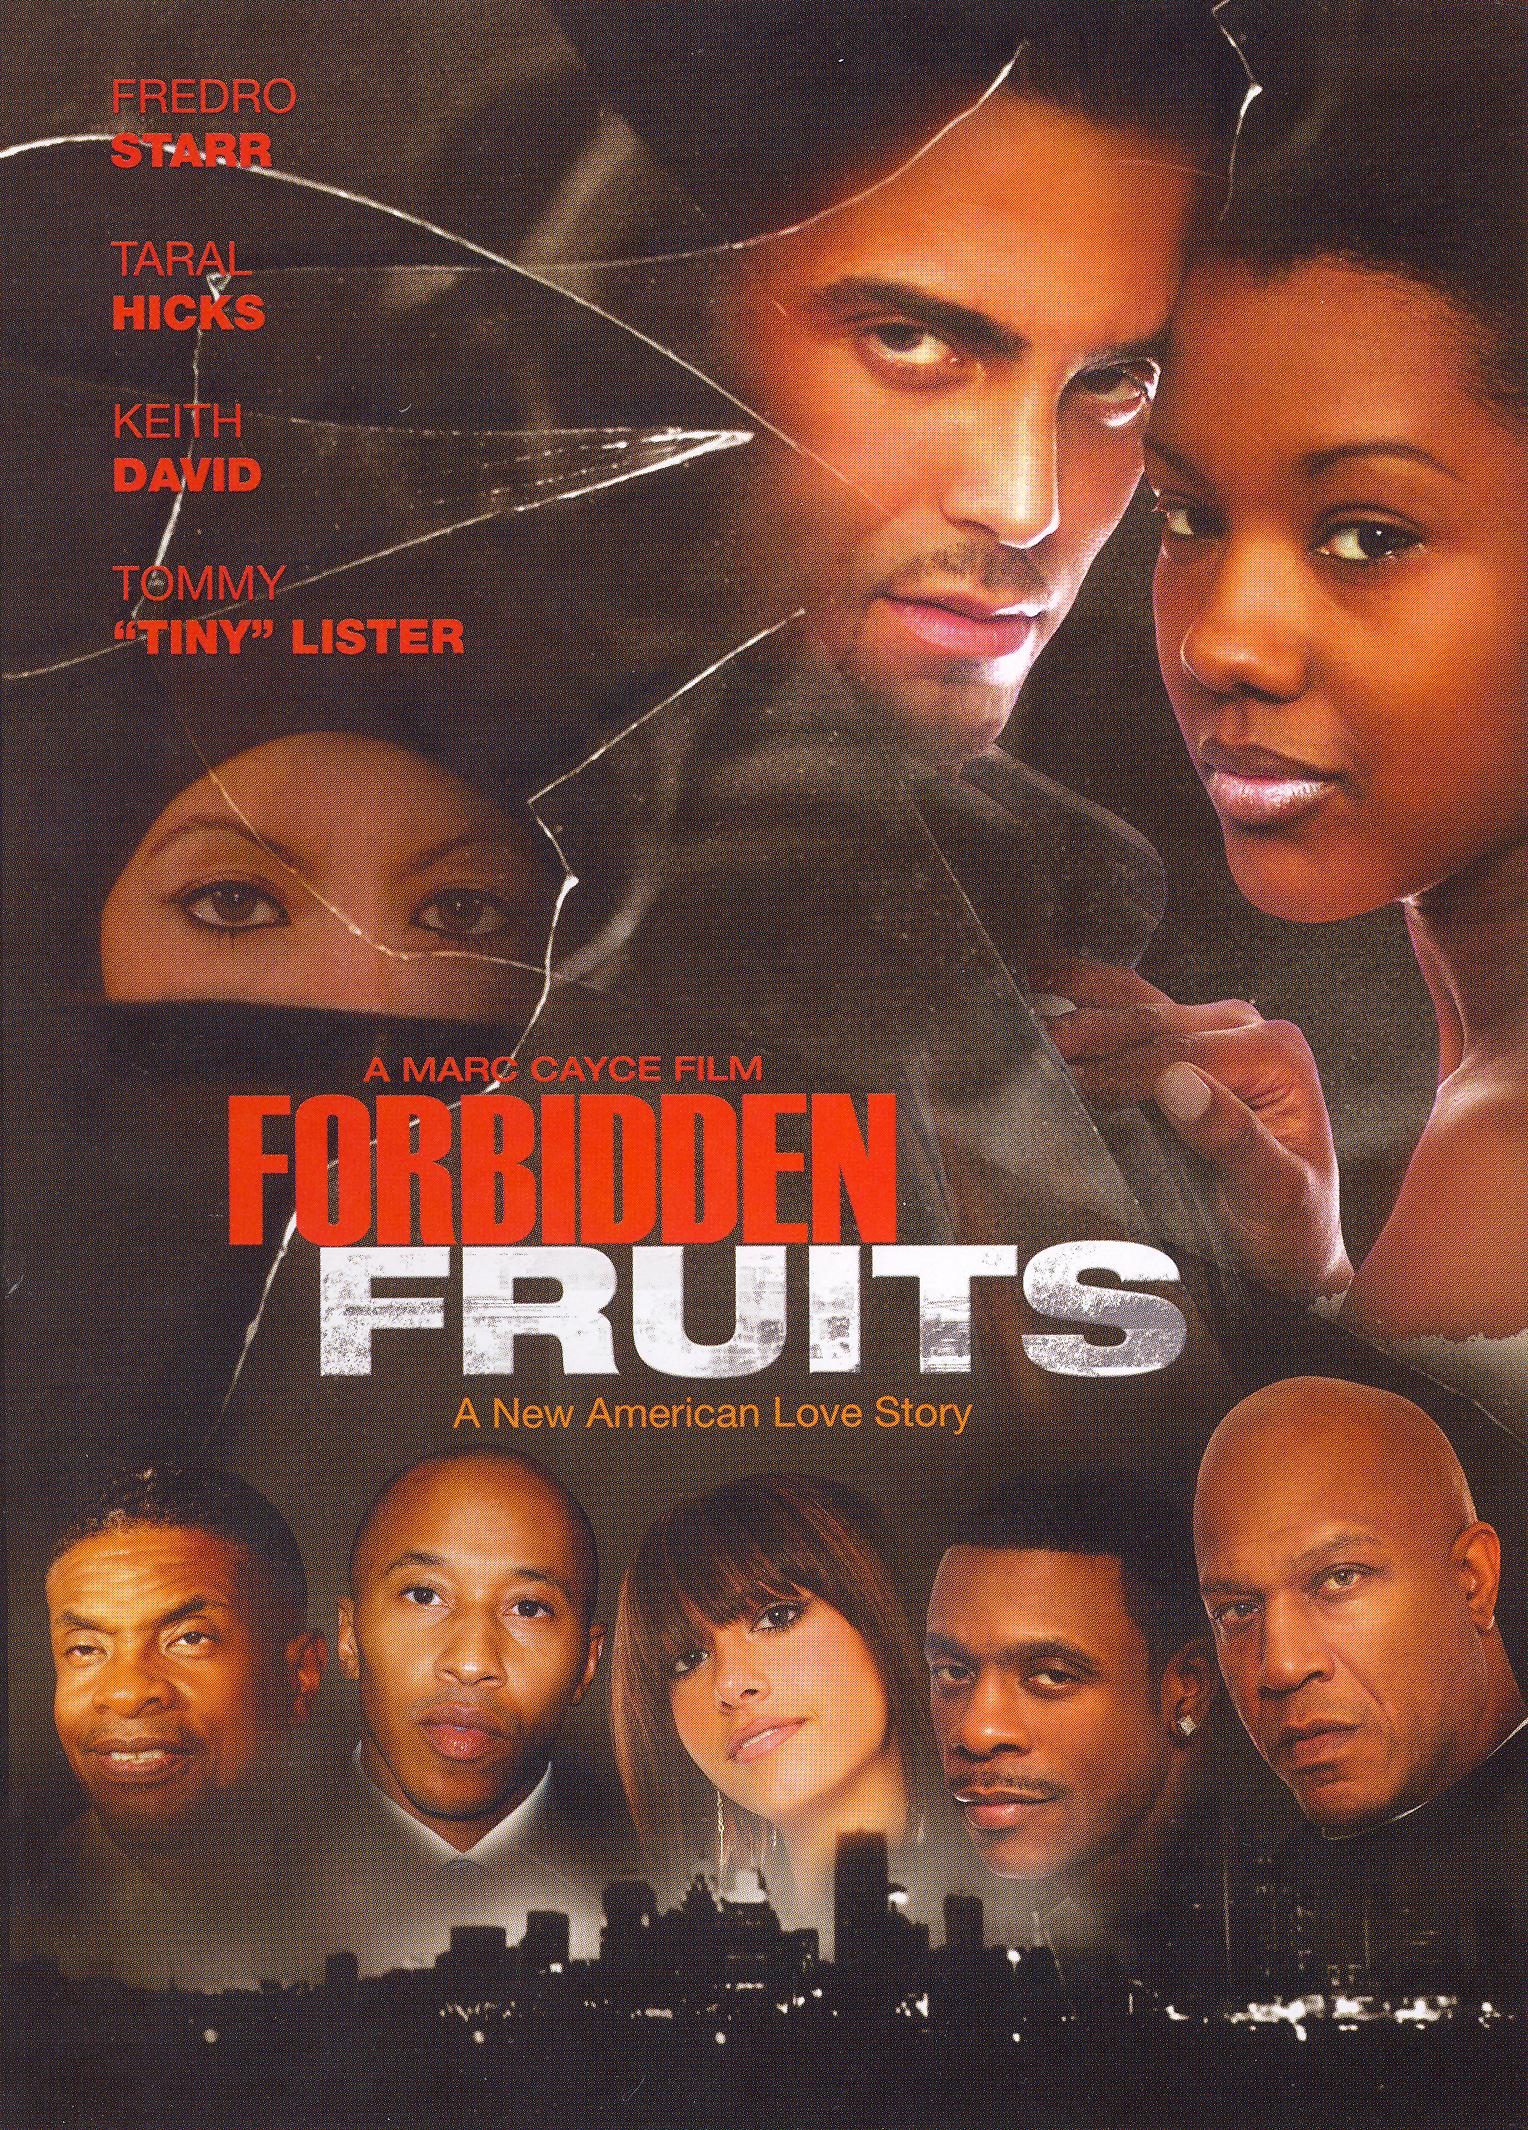 Forbidden Fruits Marc Cayce Synopsis Characteristics Moods Themes And Related Allmovie